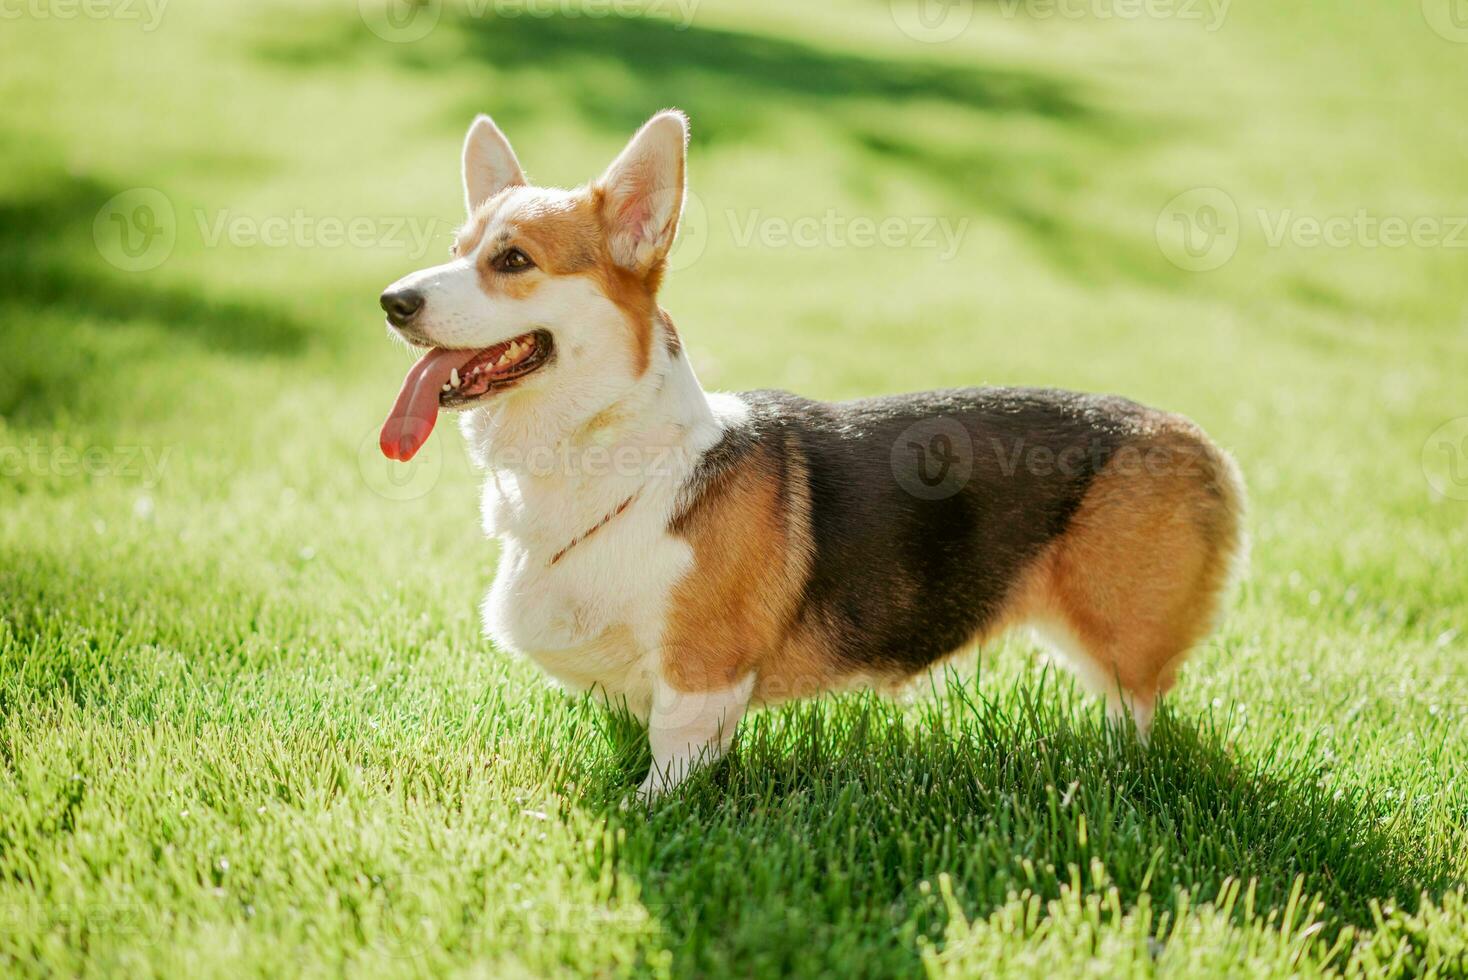 Portrait of a dog corgi breed on a background of green grass on a sunny day in summer photo